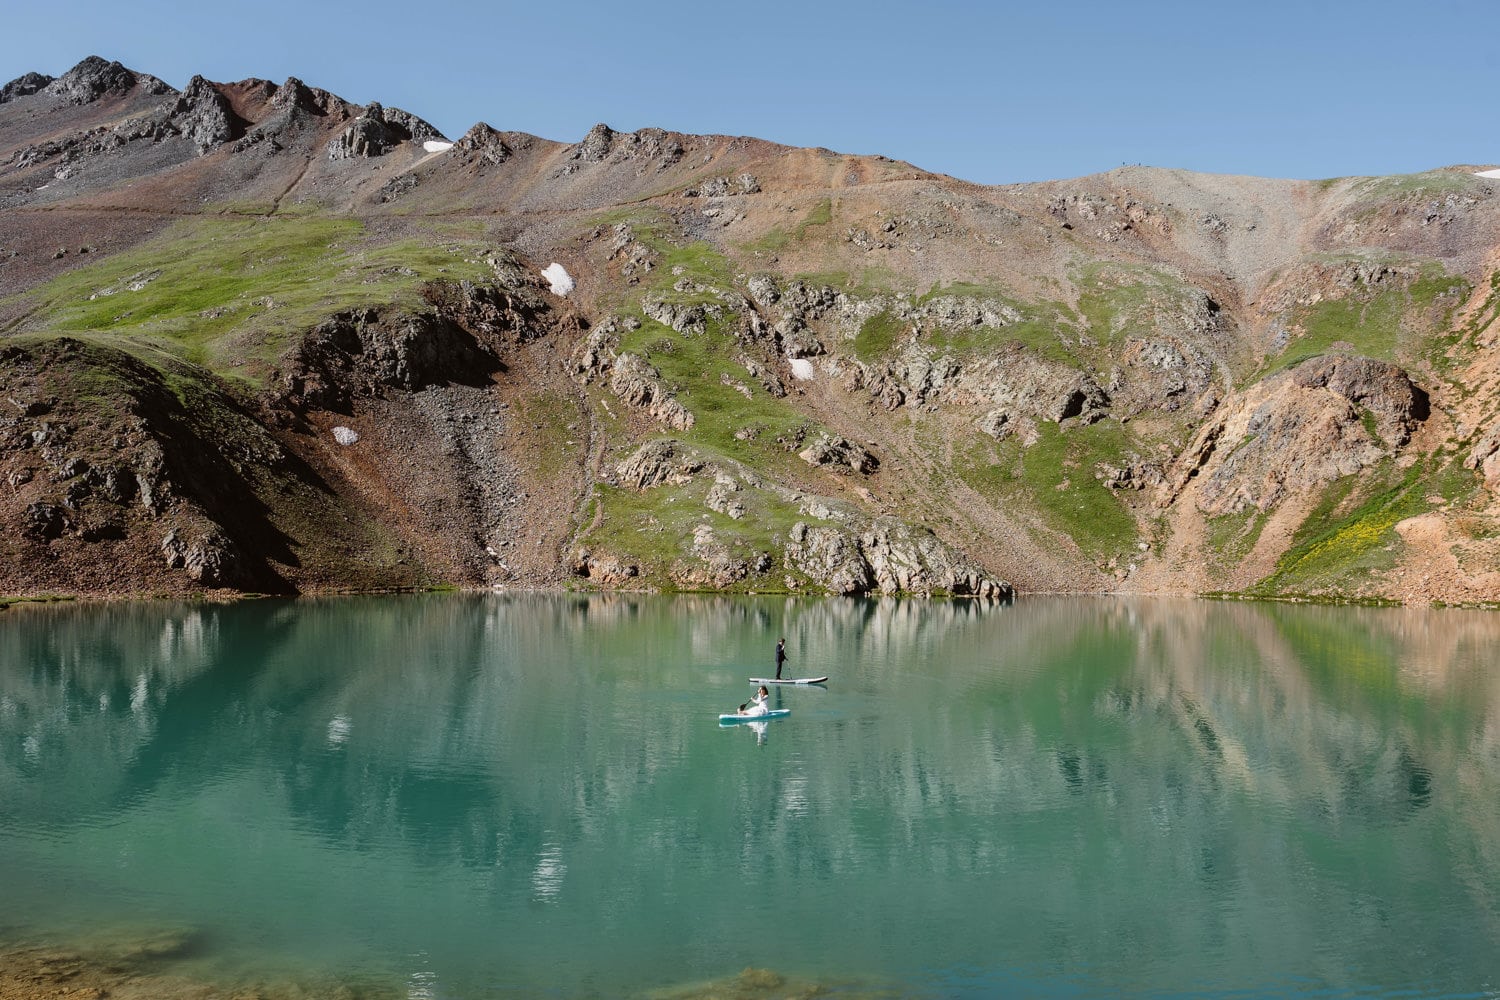 A bride and groom paddle boarding on an alpine lake in the San Juan mountains.